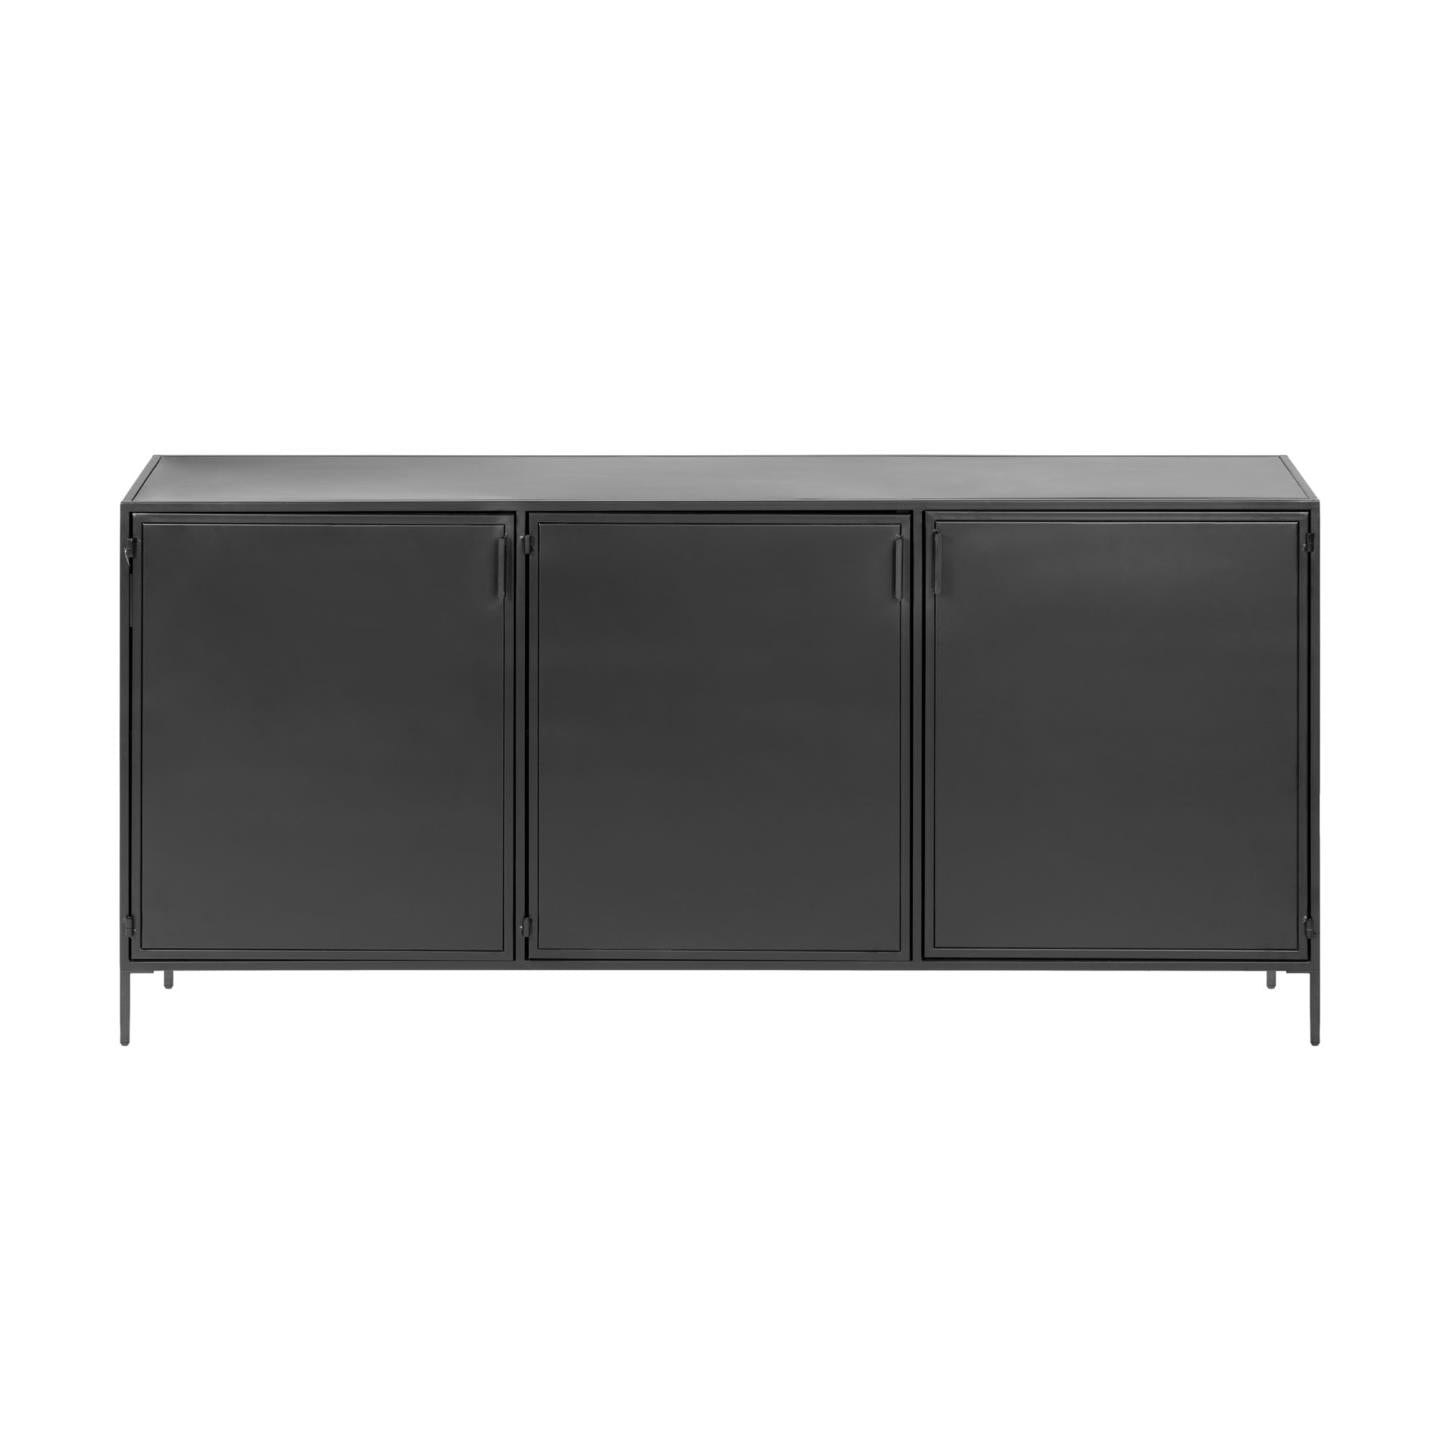 Shantay metal sideboard in a painted black finish with 3 doors, 160 x 72 cm